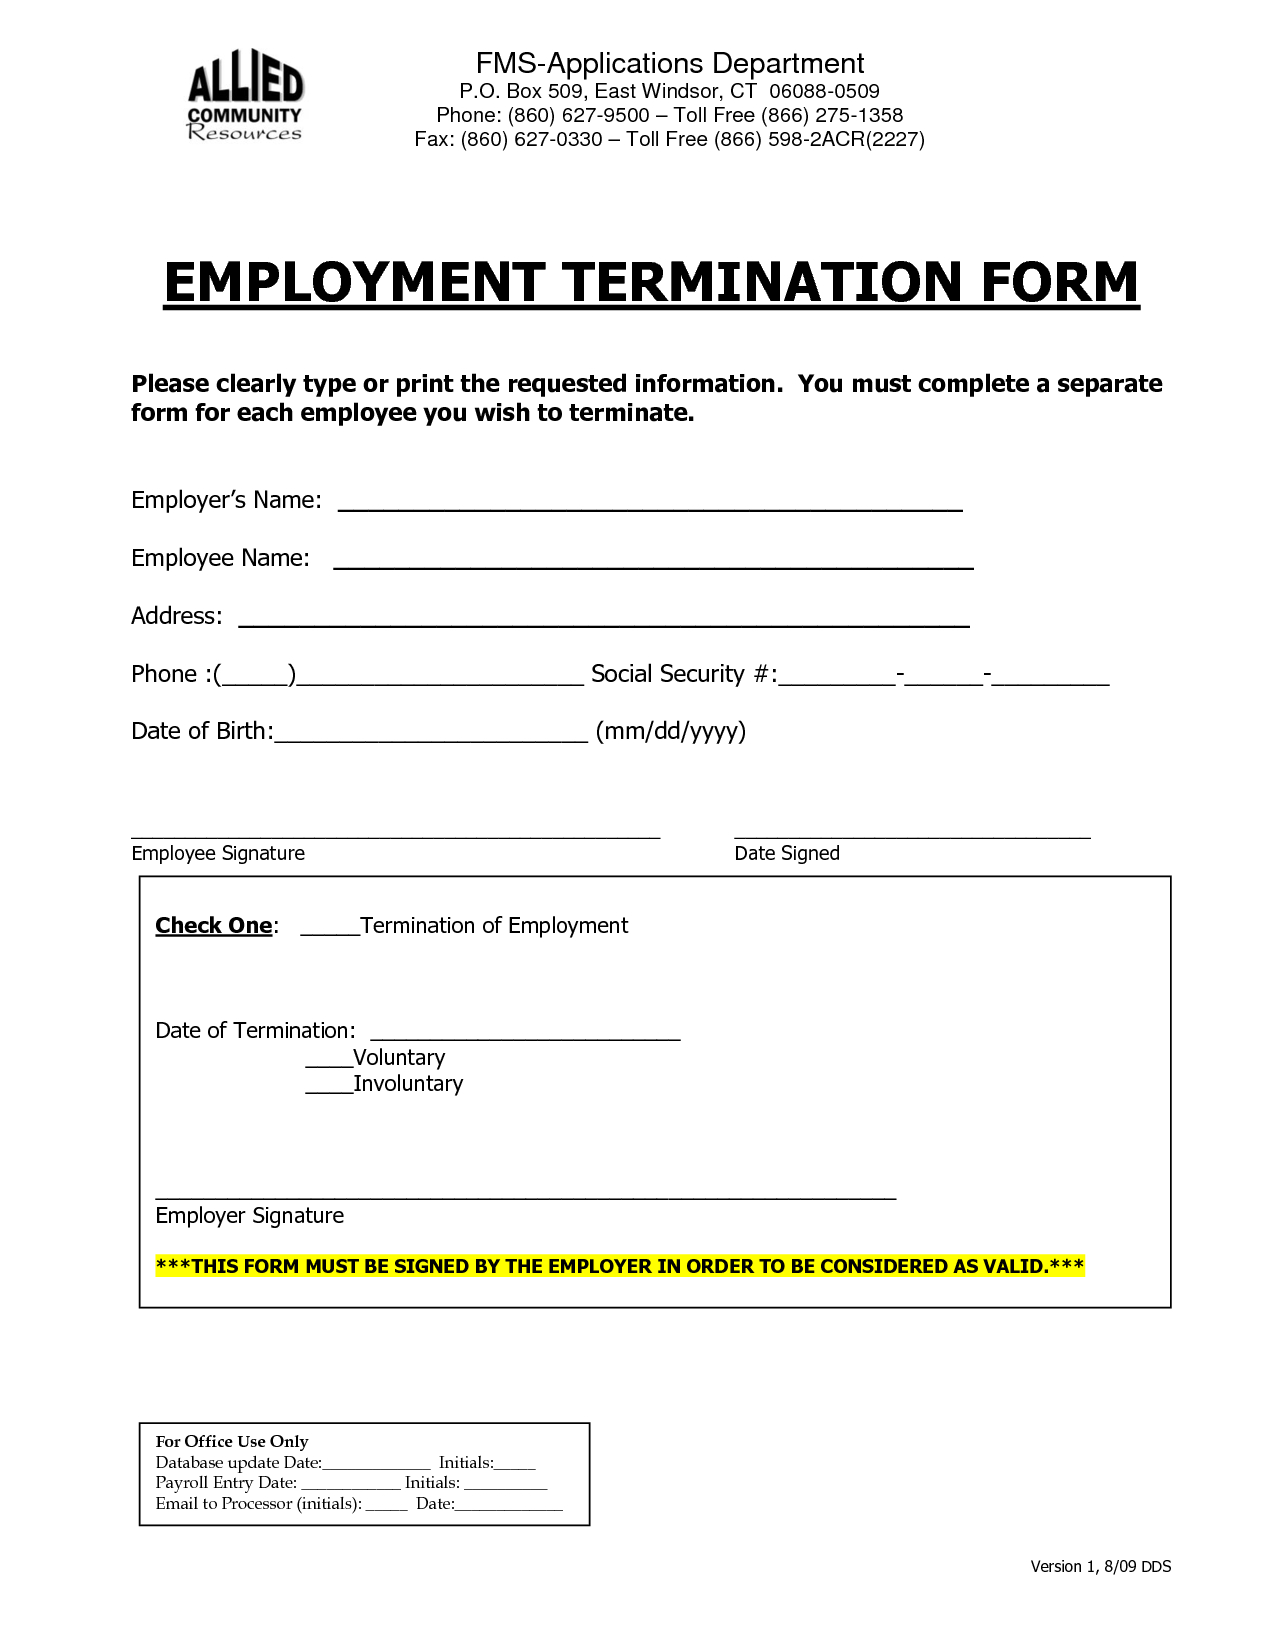 Employment Termination Form | Employee Forms | Employment Form - Free Printable Hr Forms